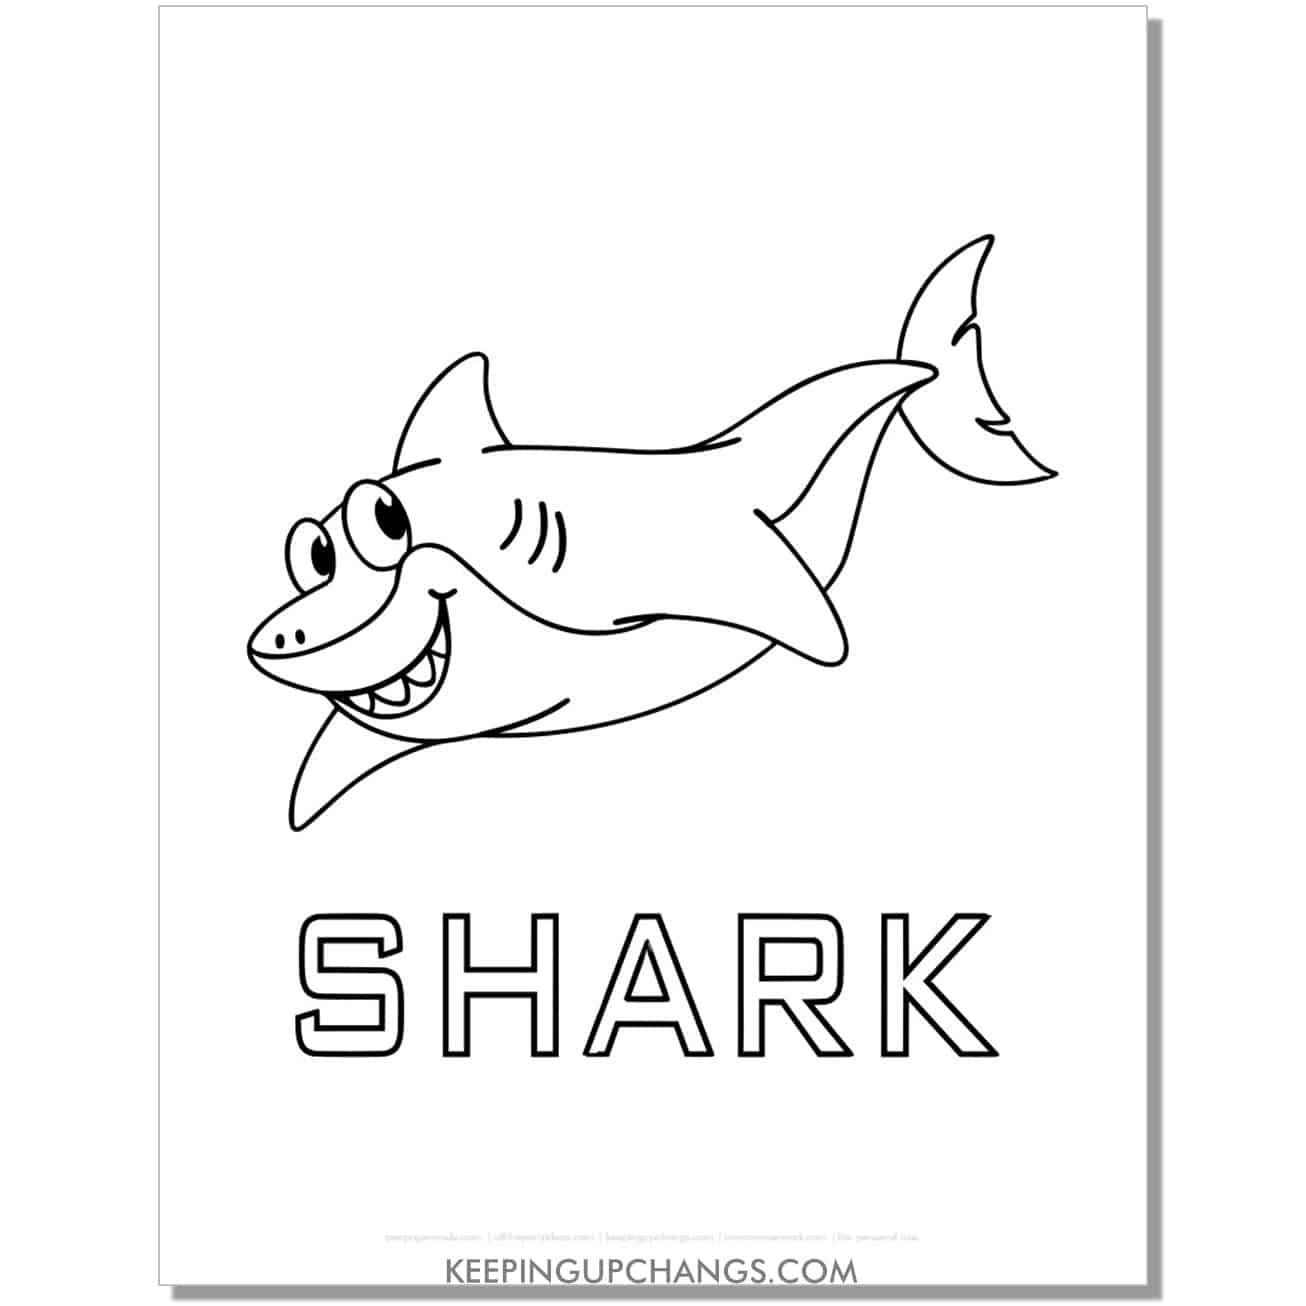 free shark with word coloring page, sheet.